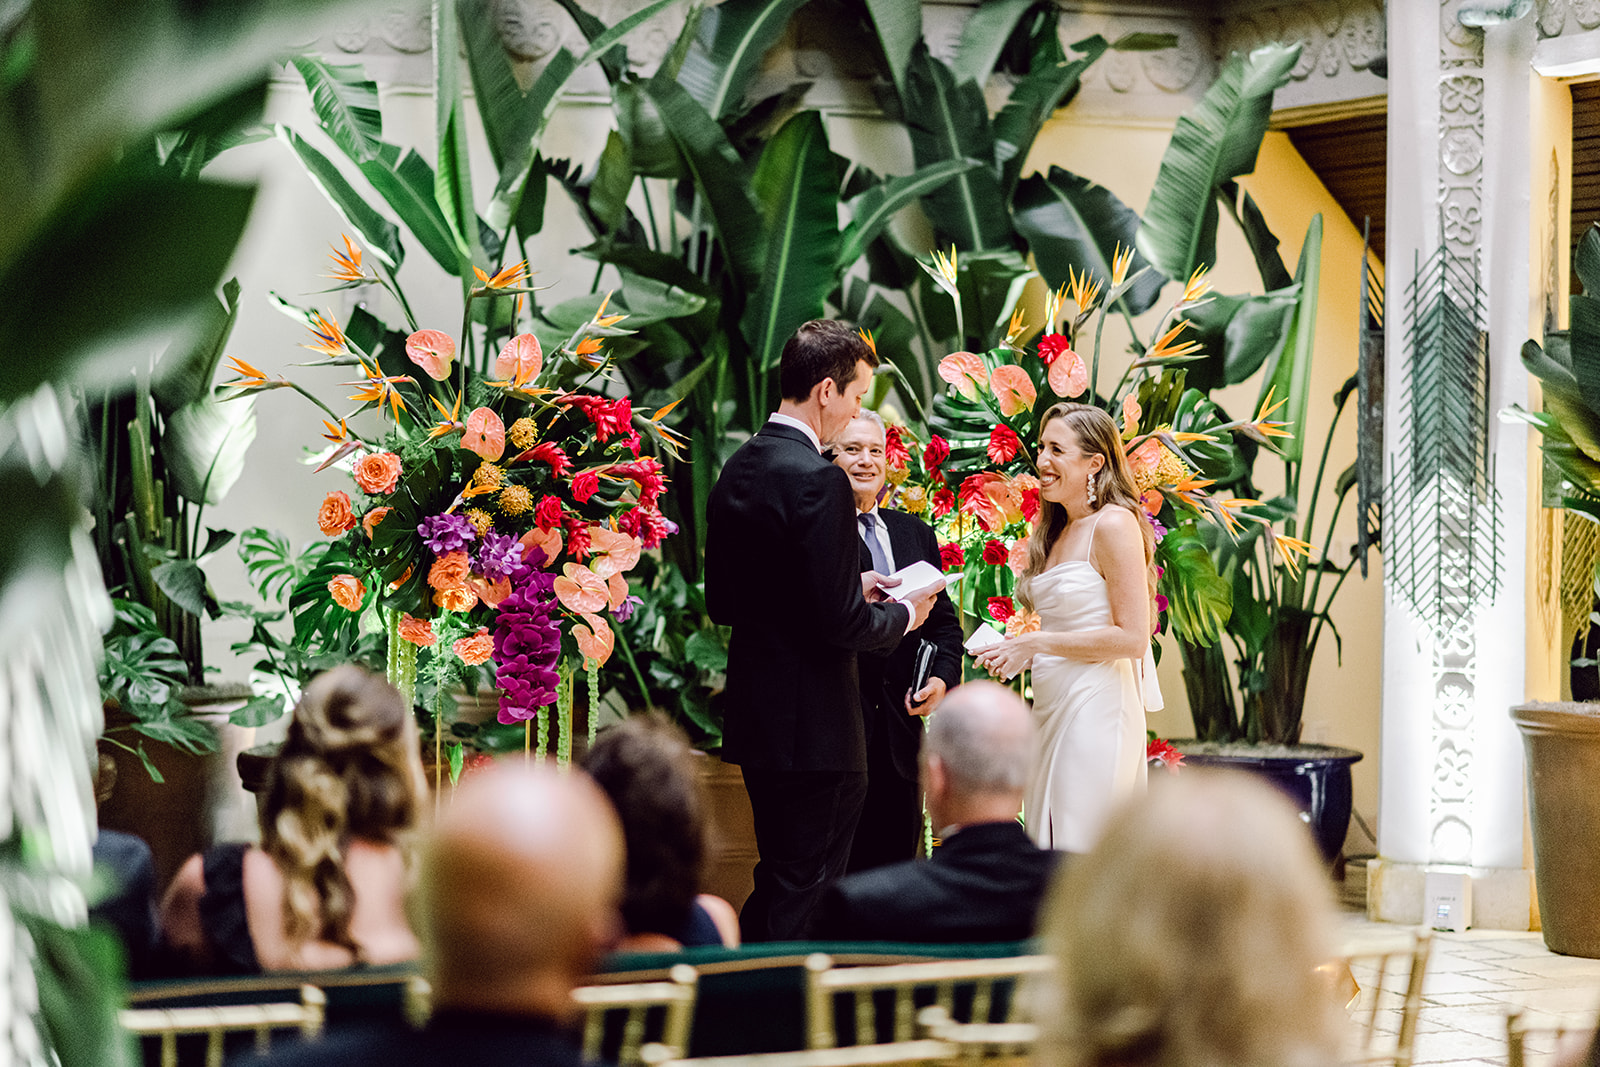 Groom reads handwritten vows at ceremony at Mayfair House Hotel & Garden in Miami on wedding day.